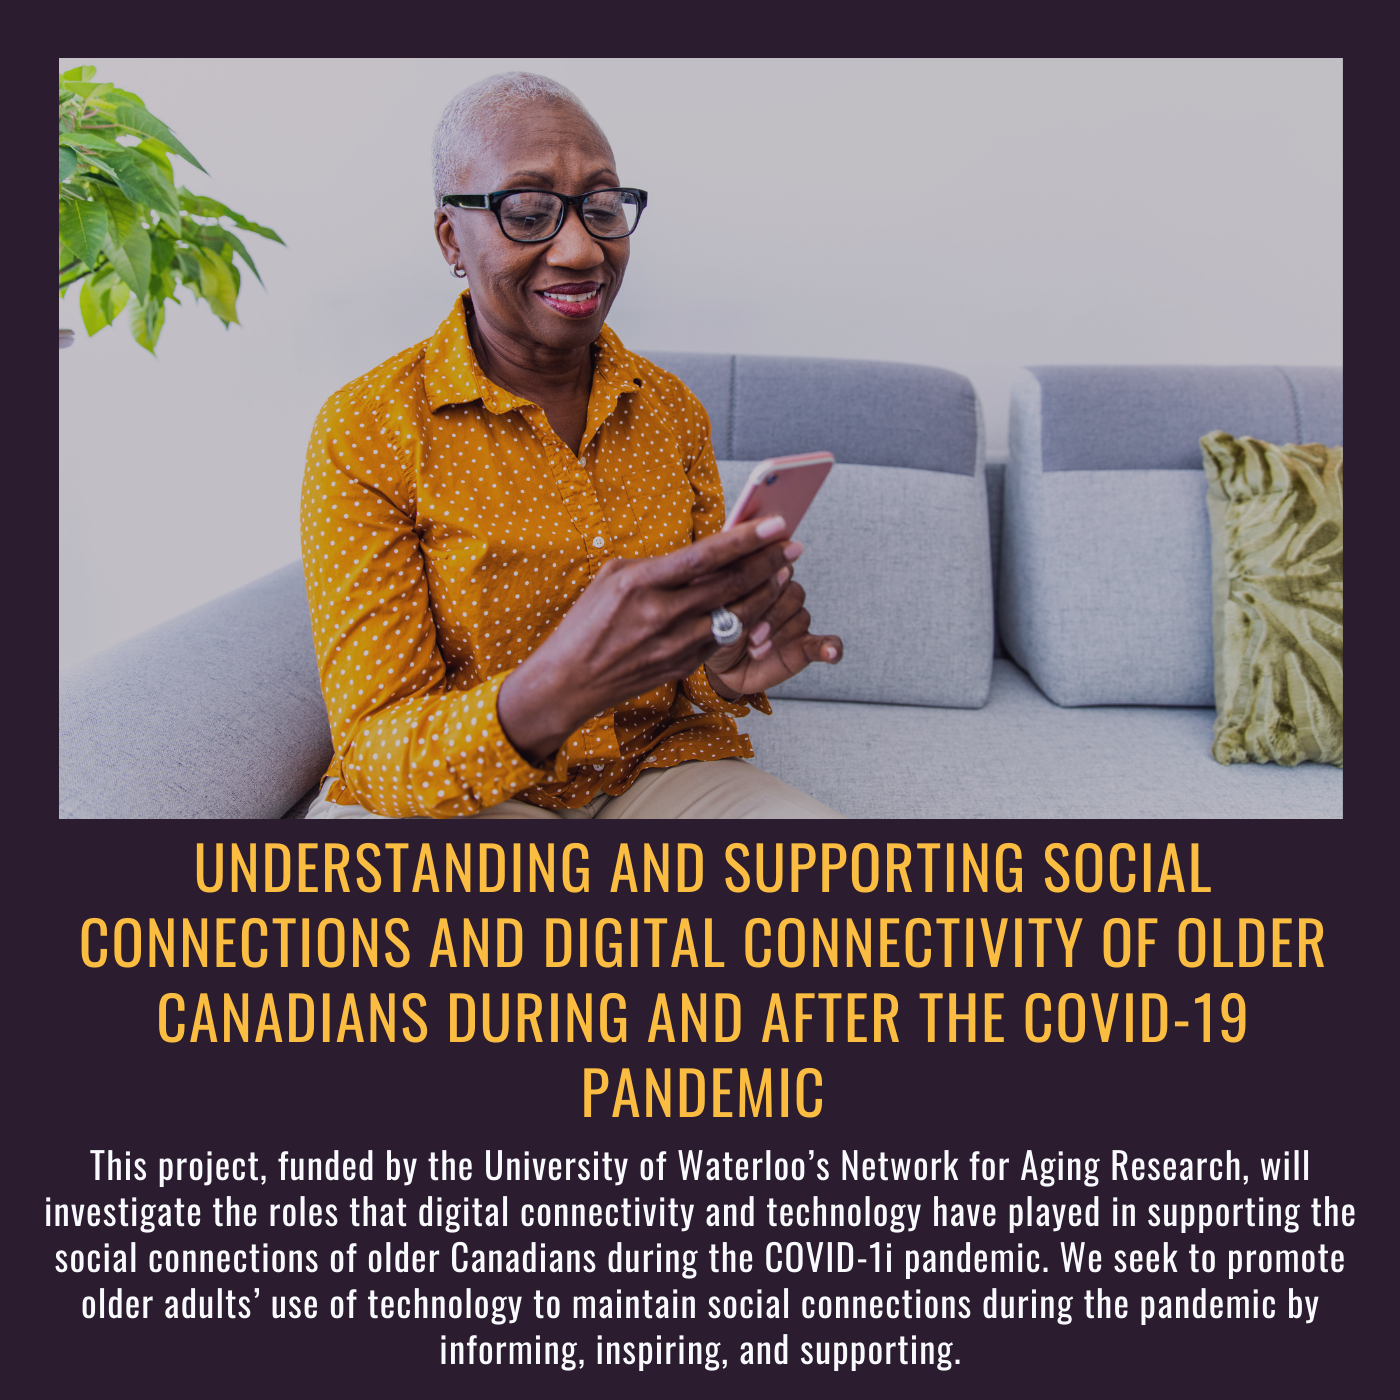 Connectivity During Understanding and supporting social connections and digital connectivity of older Canadians during and after the COVID-19 pandemic This project, funded by the University of Waterloo’s Network for Aging Research, will investigate the roles that digital connectivity and technology have played in supporting the social connections of older Canadians during the COVID-1i pandemic. We seek to promote older adults’ use of technology to maintain social connections during the pandemic by informing, inspiring, and supporting. Picture of older woman looking at iphone